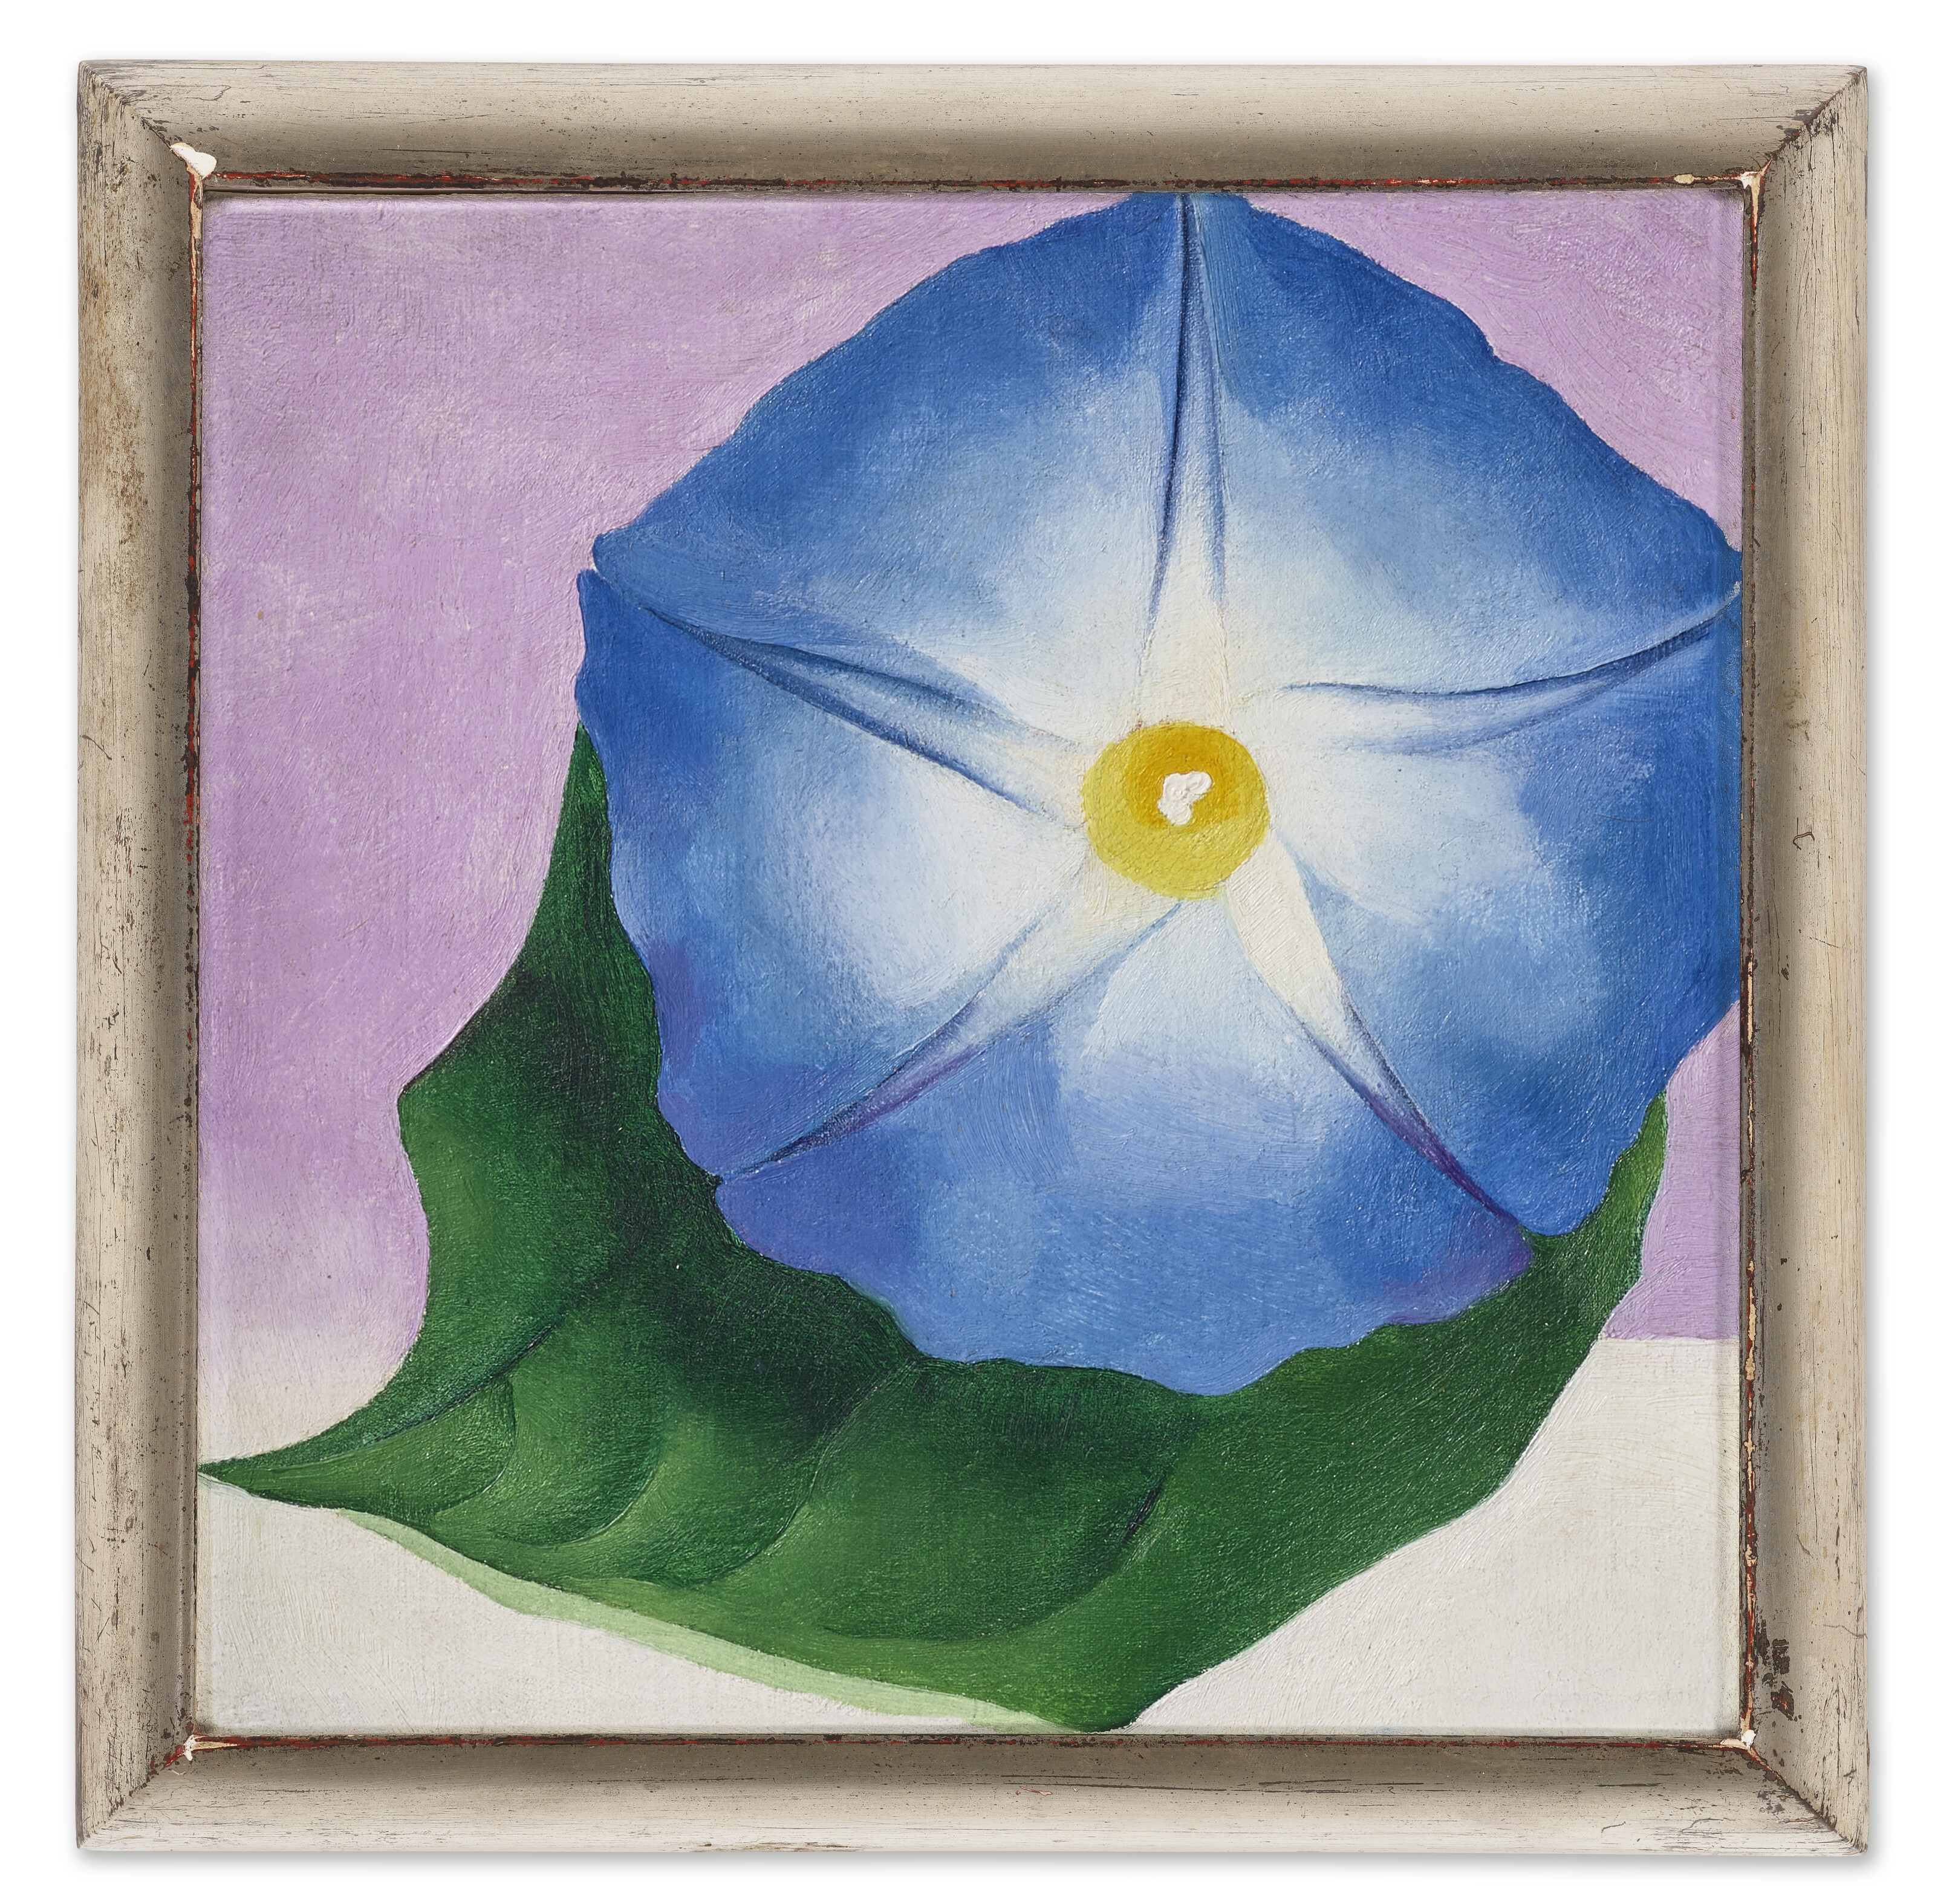 Artwork by Georgia O'Keeffe, Blue Morning Glory, Made of oil on canvas